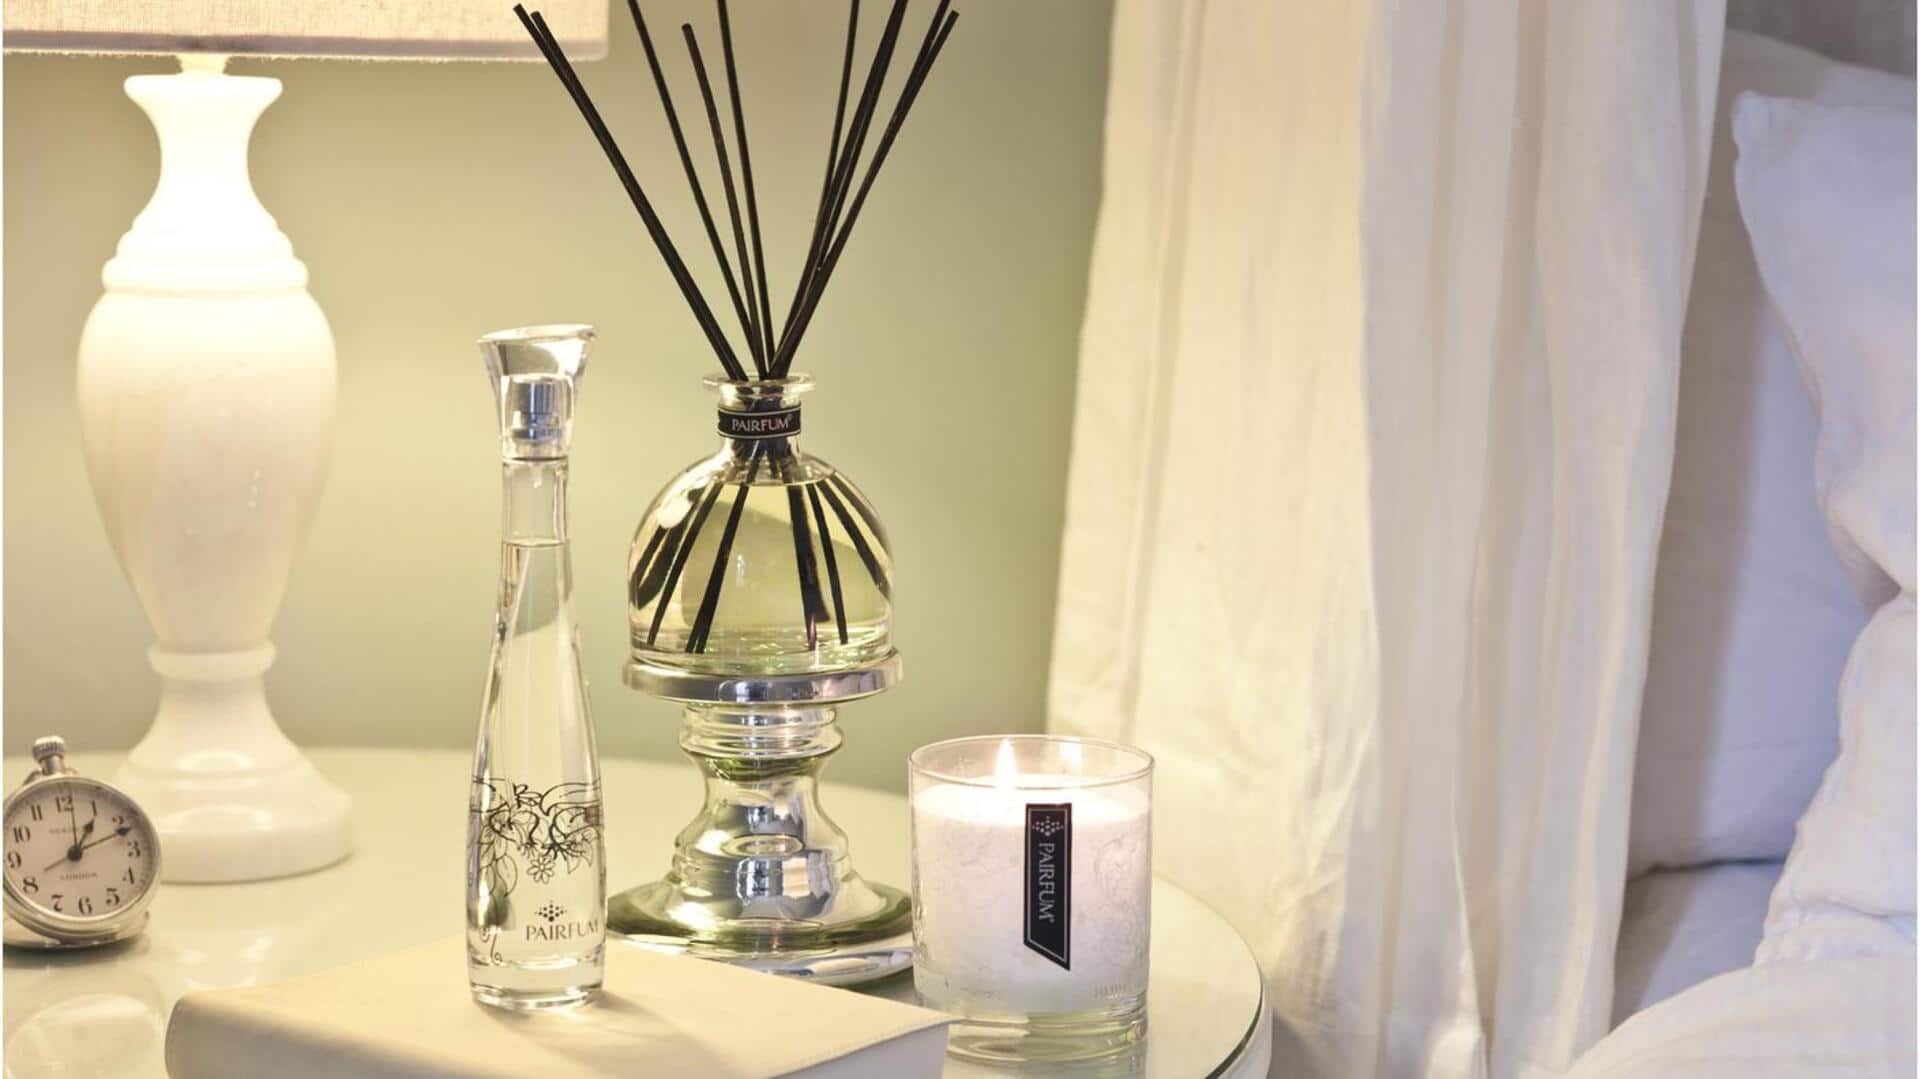 Diffusers v/s scented candles: Which is the best